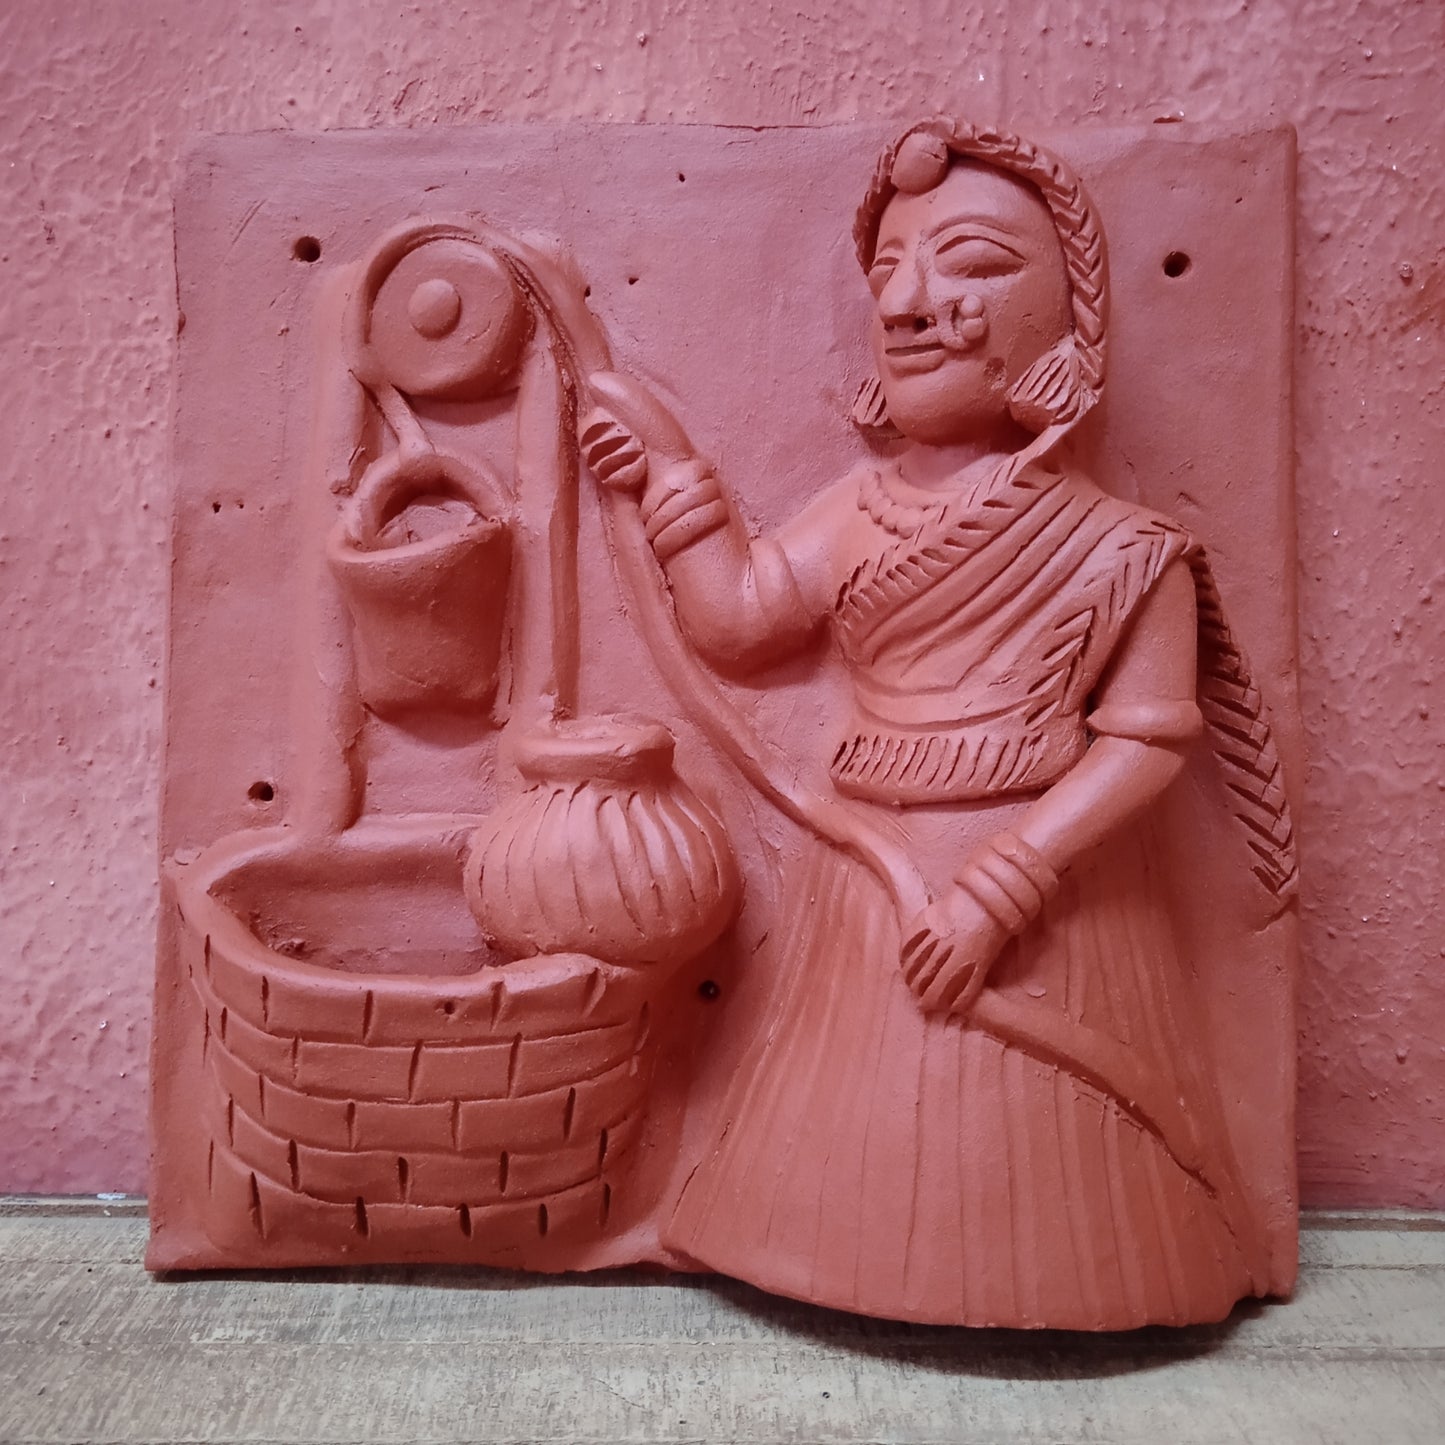 Terracotta woman at a well